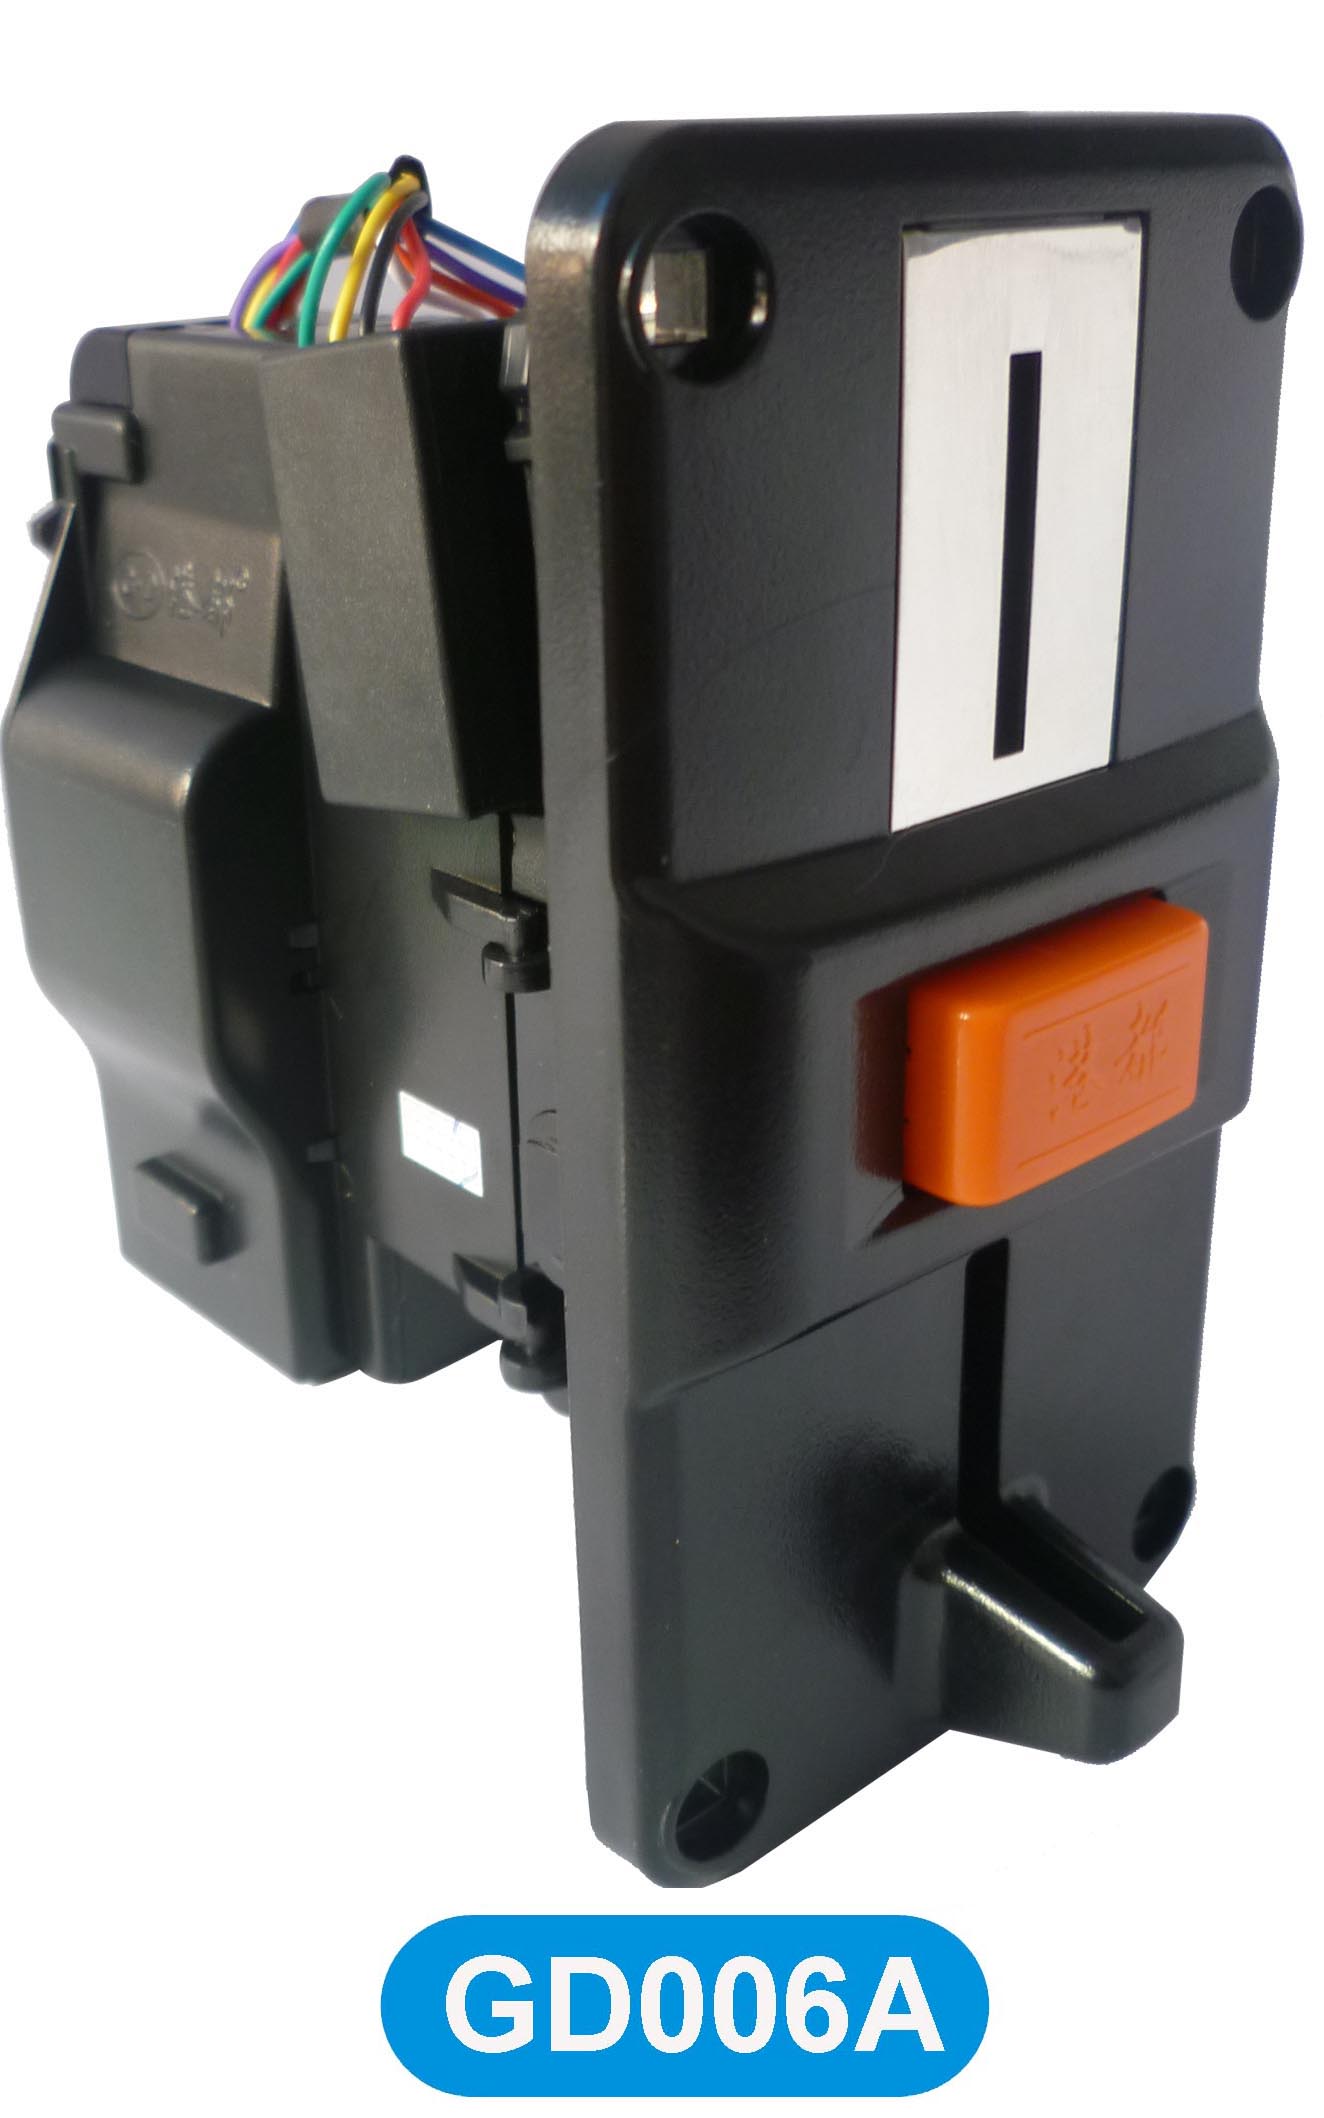 GD006A GD Intelligent coin acceptor  ,coin selector validators